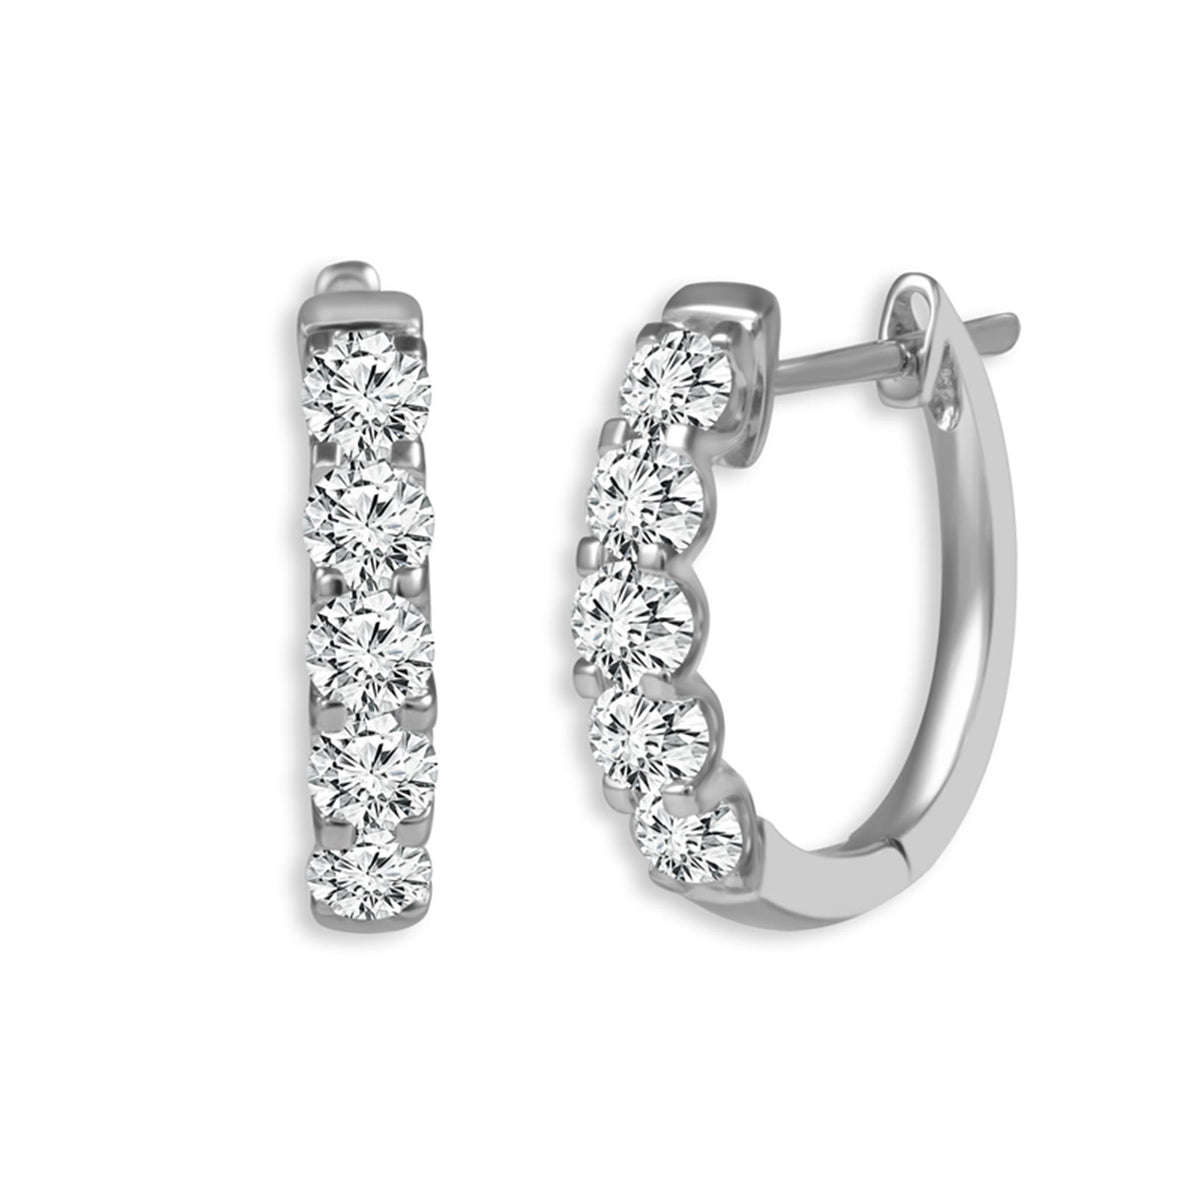 14Kt White Gold Oval Hoop Earrings with 1.64cttw Natural Diamonds